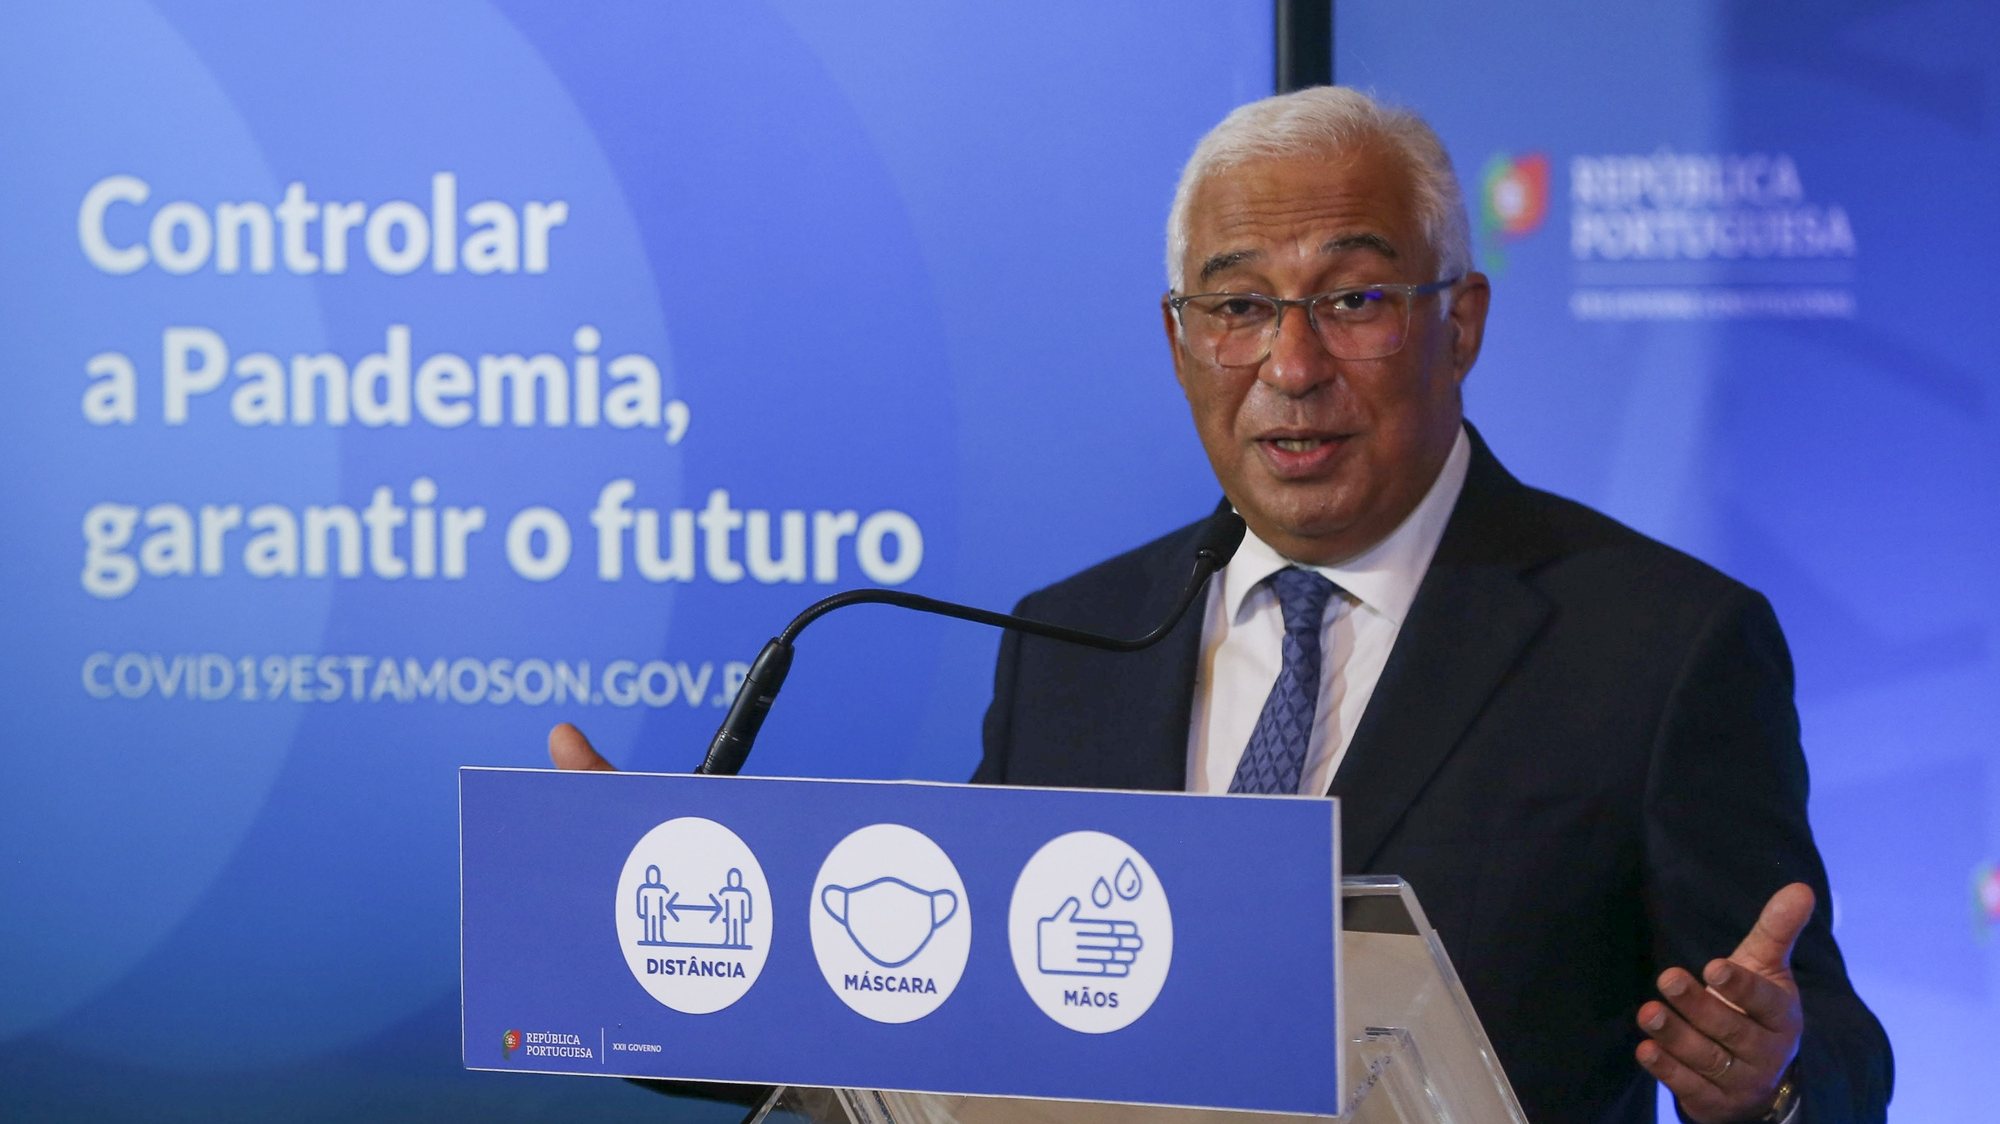 Portuguese Prime Minister Antonio Costa speaks to announce the new measures during the briefing of the Council of Ministers Meeting, at Ajuda Palace, in Lisbon, Portugal, 21 December 2021. In Portugal, since March 2020, 18,812 people have died and 1,233,608 cases of infection have been counted, according to data from the Directorate-General of Health. MANUEL DE ALMEIDA/LUSA